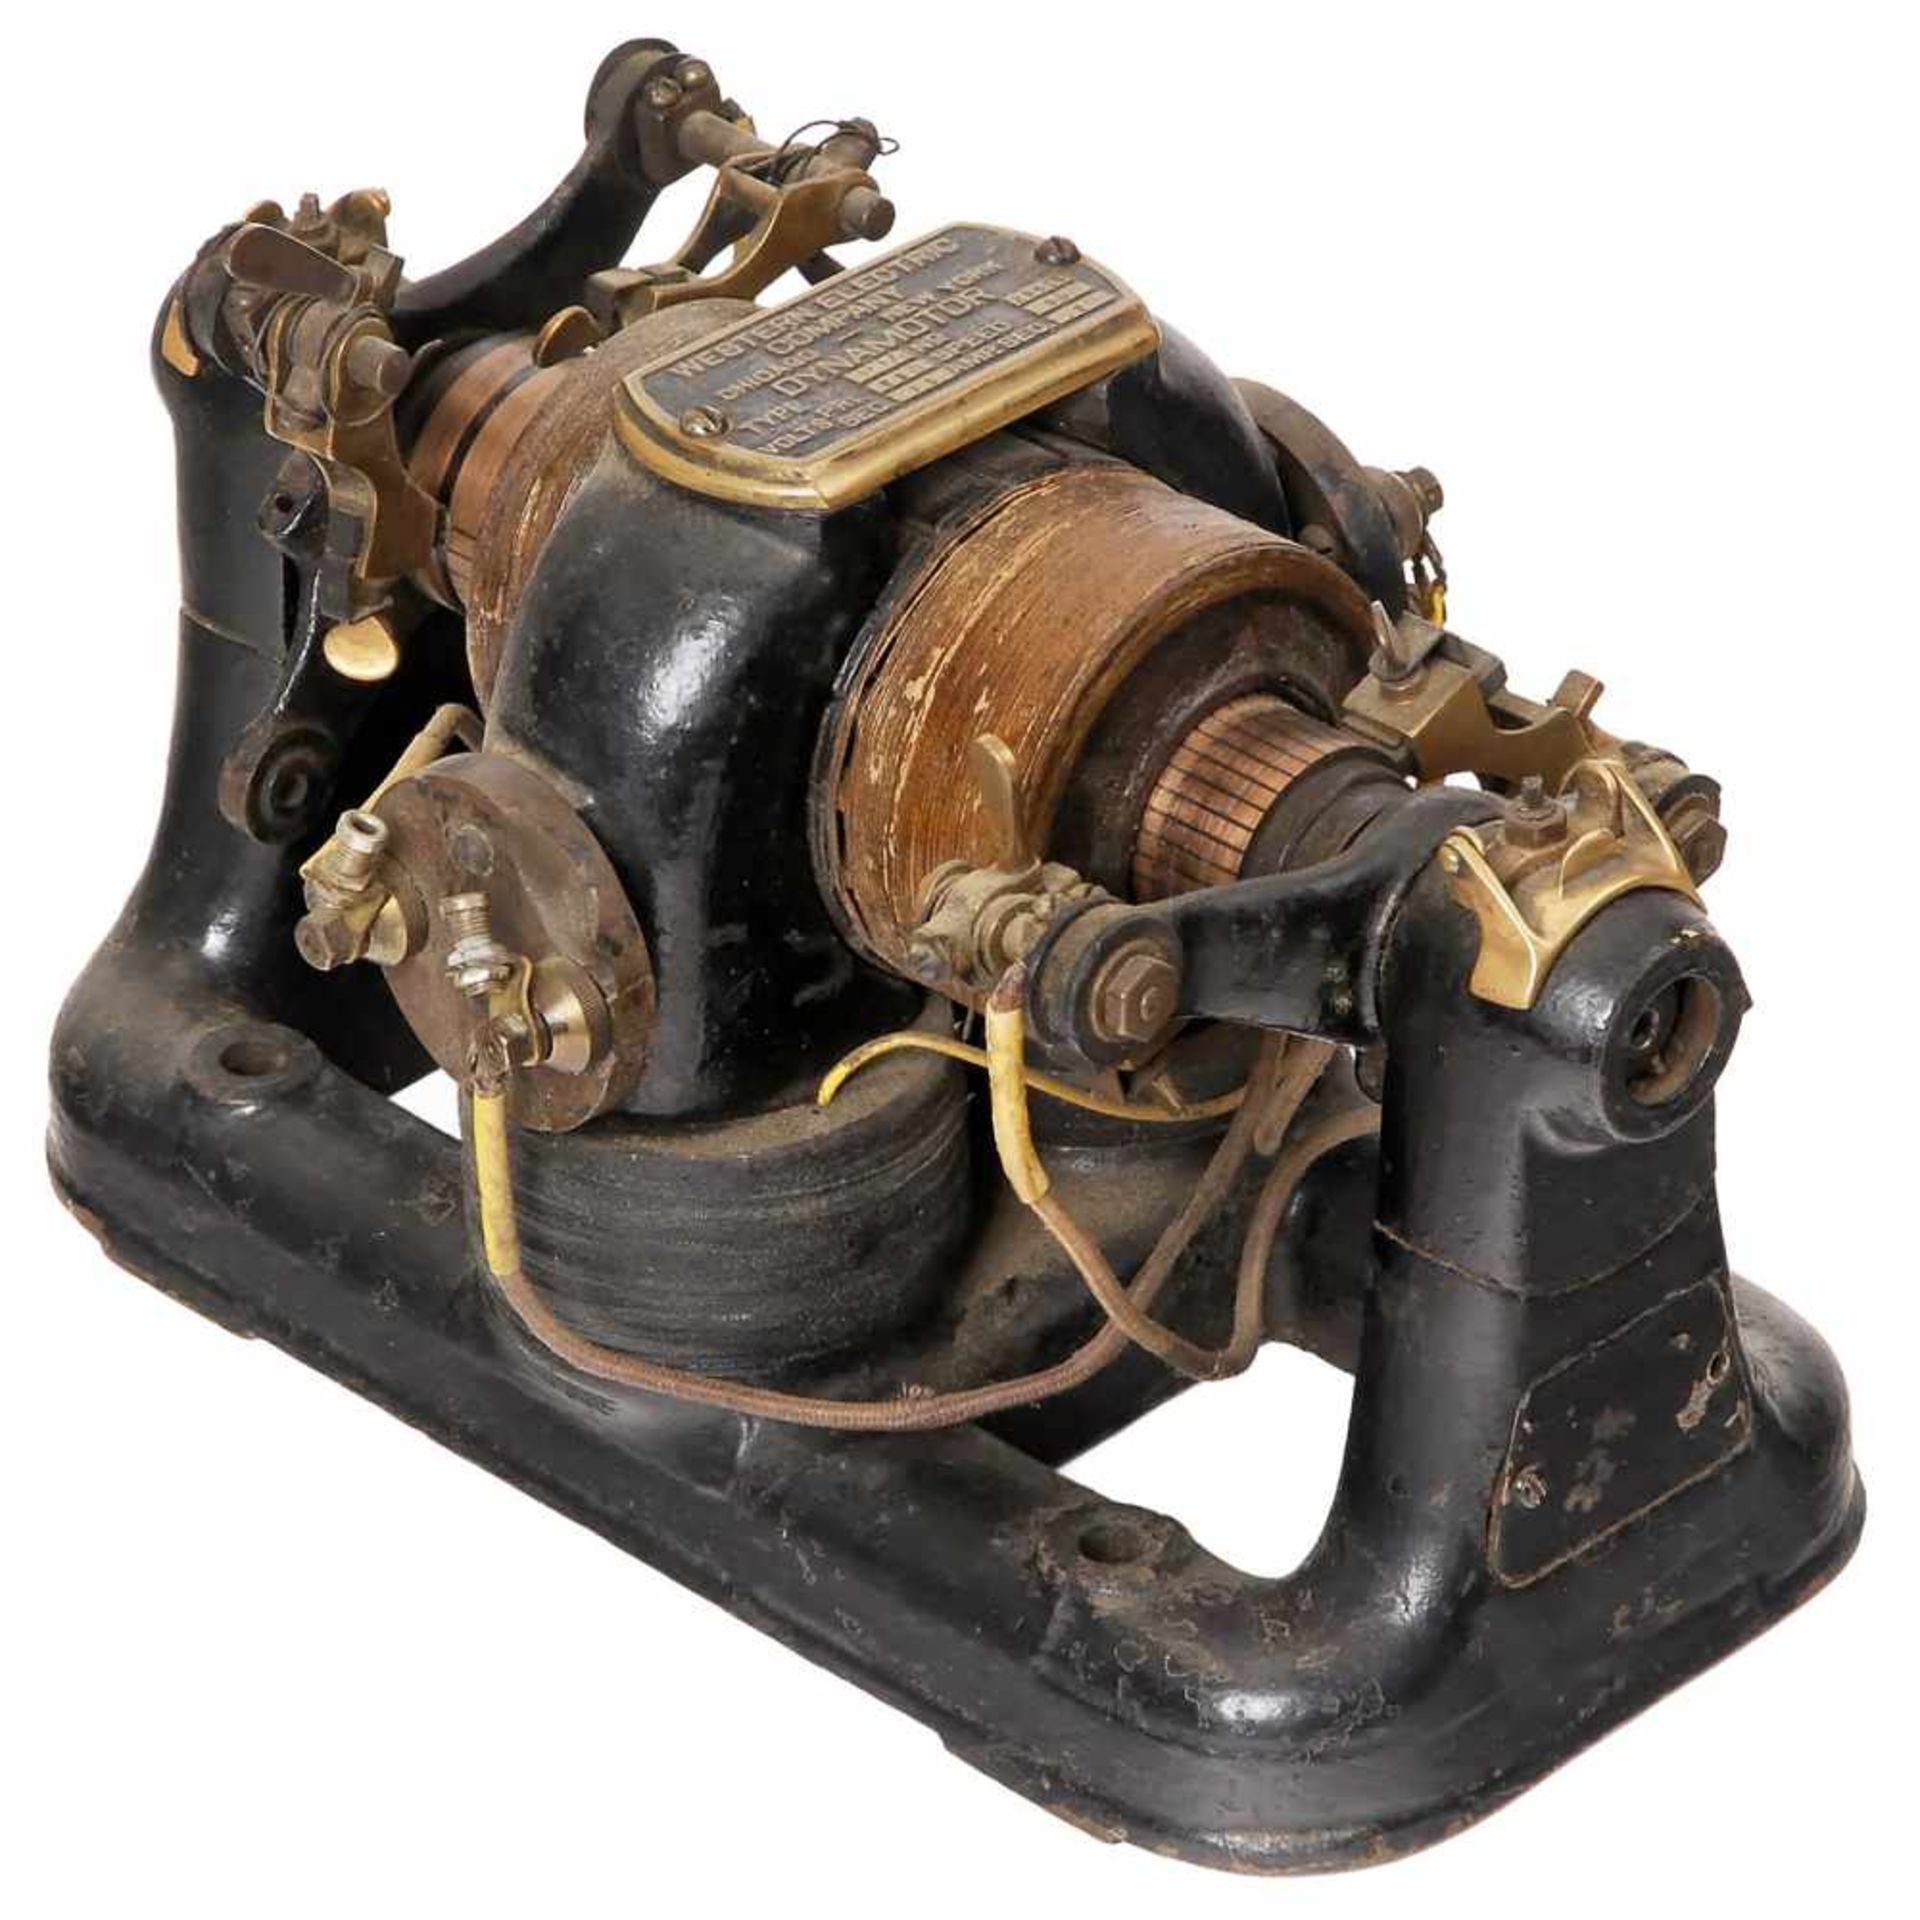 Western Electric Dynamotor, c. 1895Type P1/6, cast-iron base, commutator for DC operation and slip